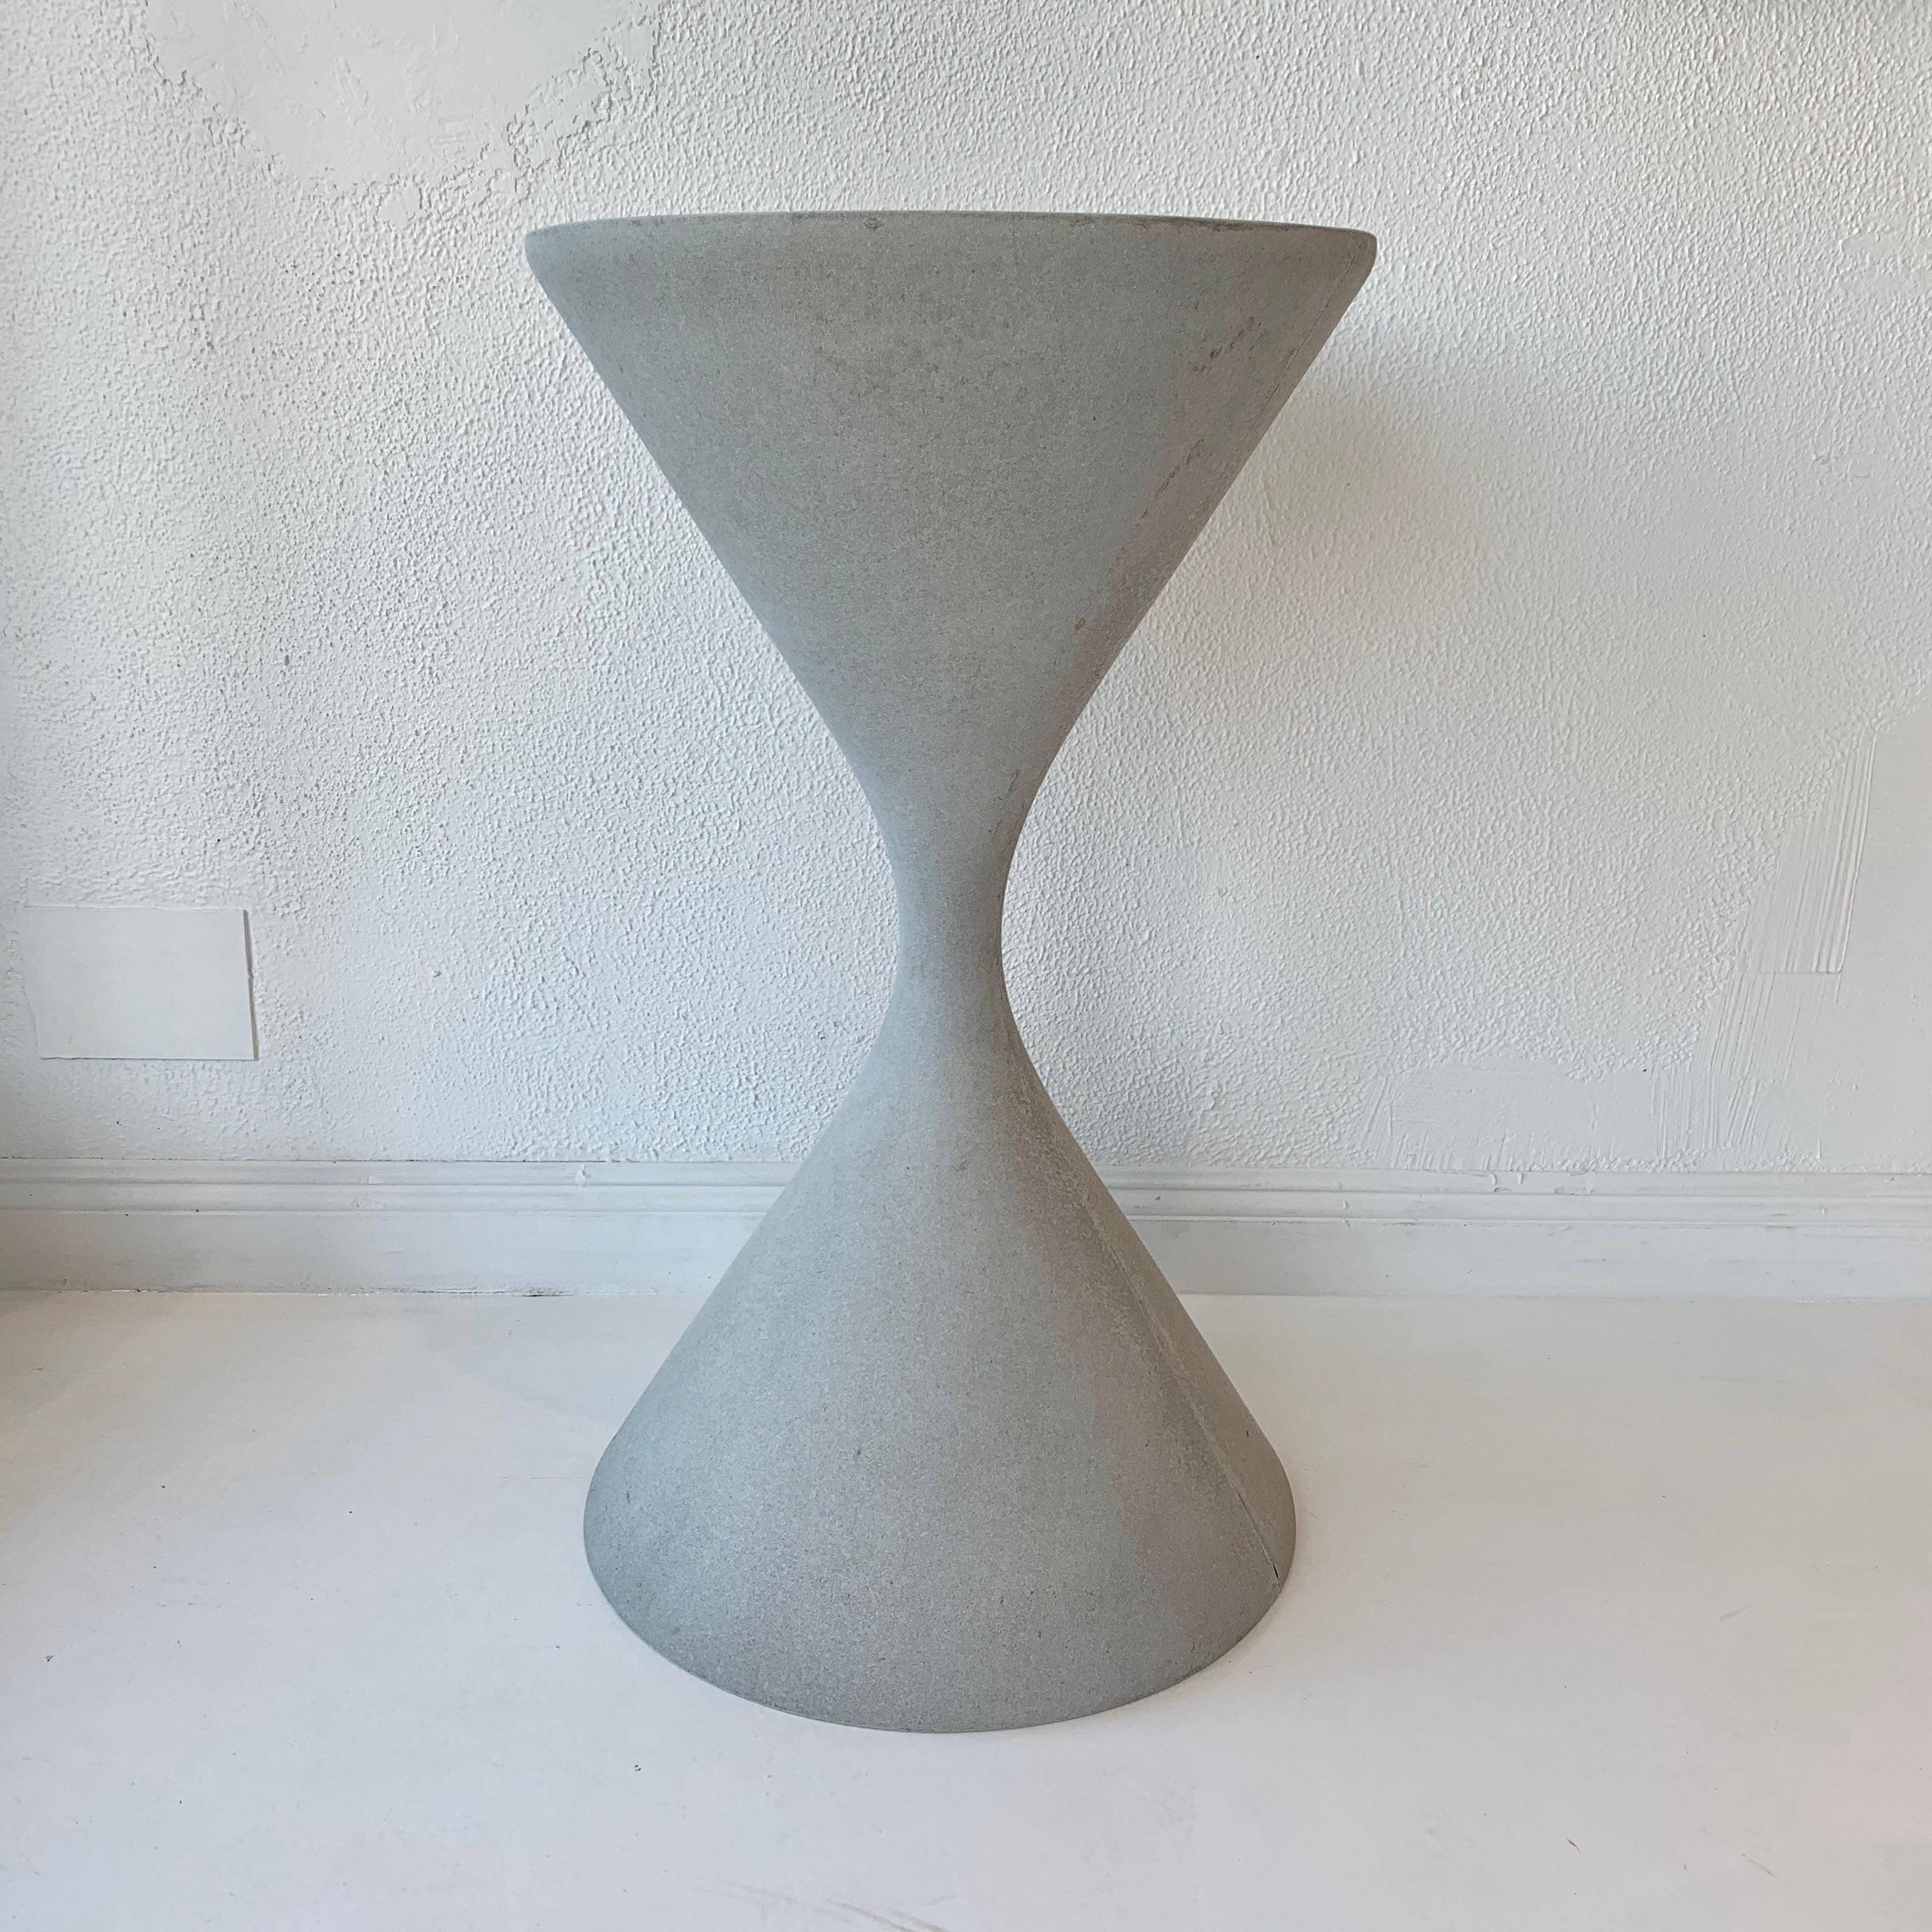 Massive hourglass planters by Swiss designer Willy Guhl. Newly produced. Largest size made by Willy Guhl. Handmade in the same factories as the vintage planters. Made of thin fibrous cement. Stunning piece of design. Stamped with factory date and